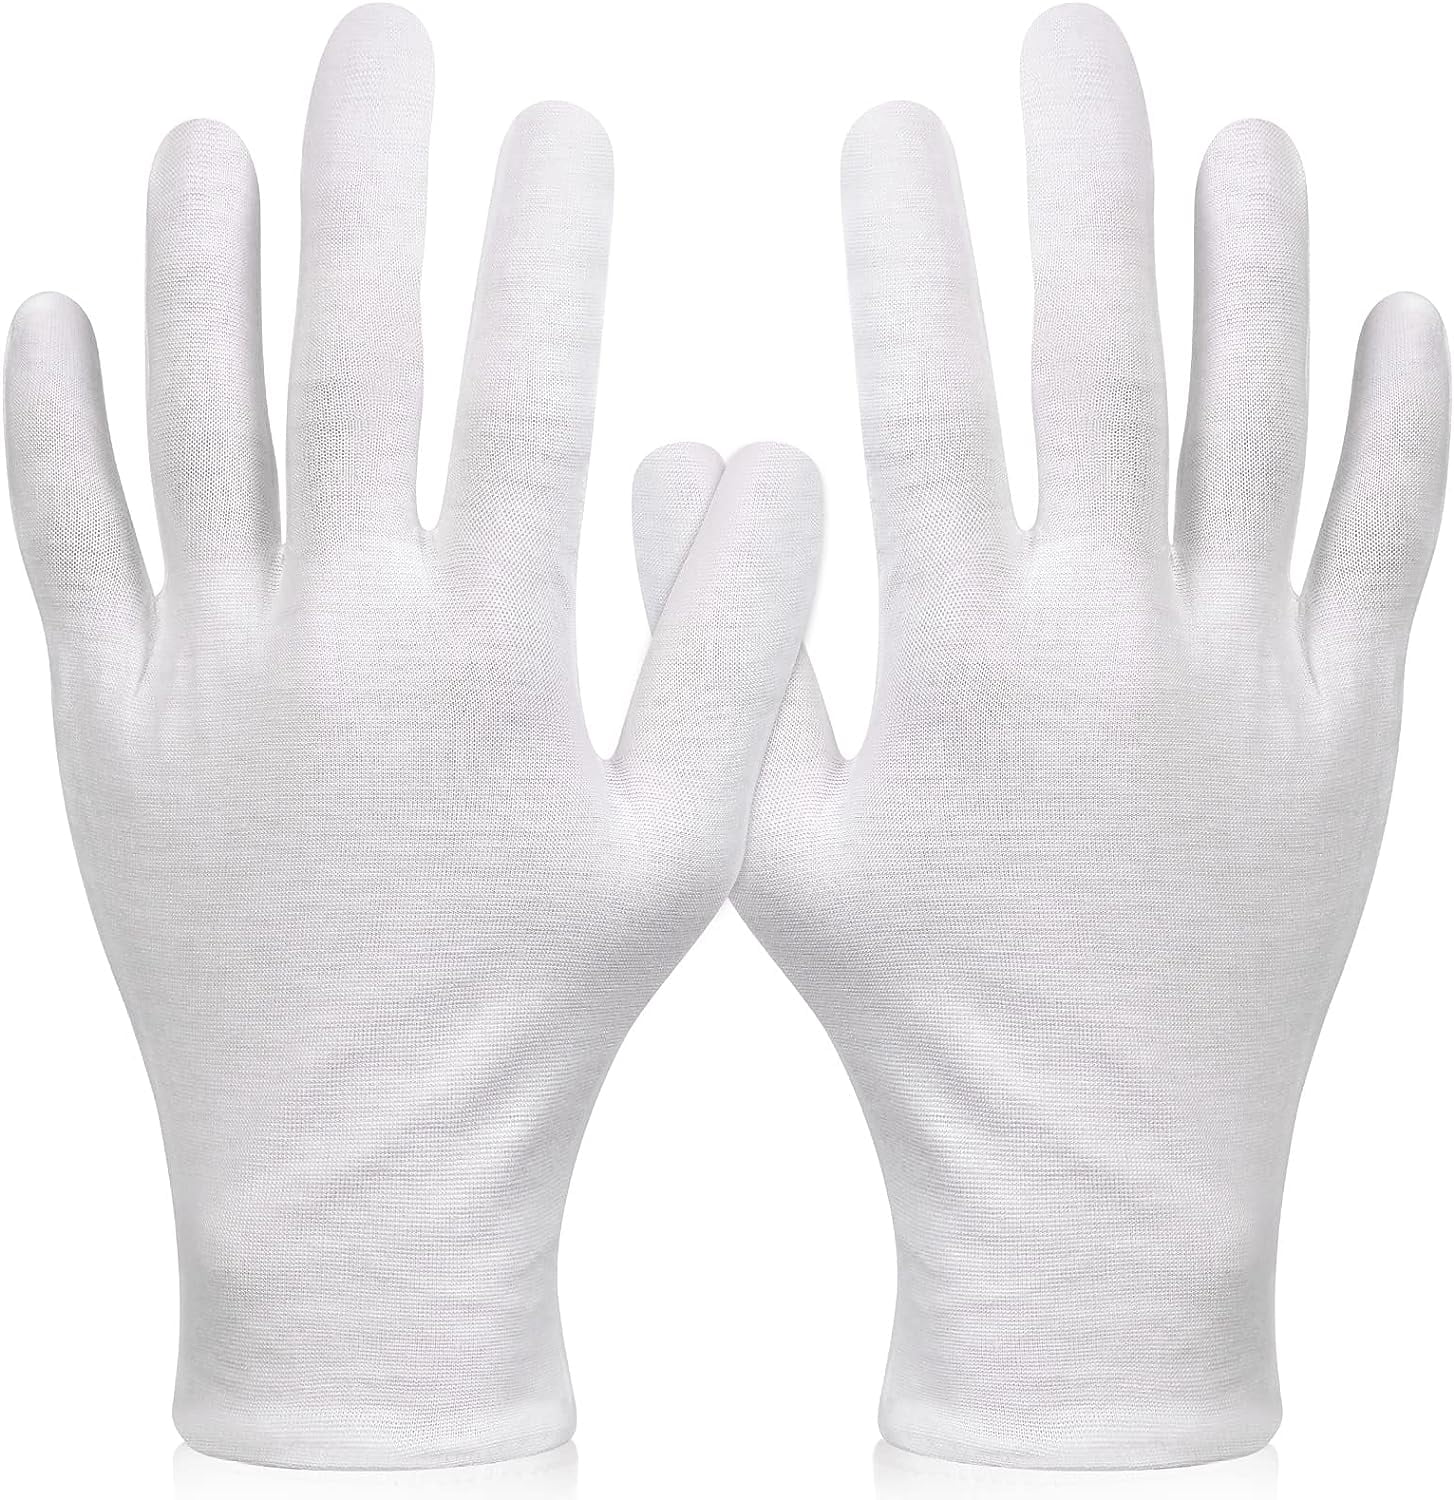 6 Pairs XL White Cotton Gloves for Dry Hand Moisturizing Cosmetic ...